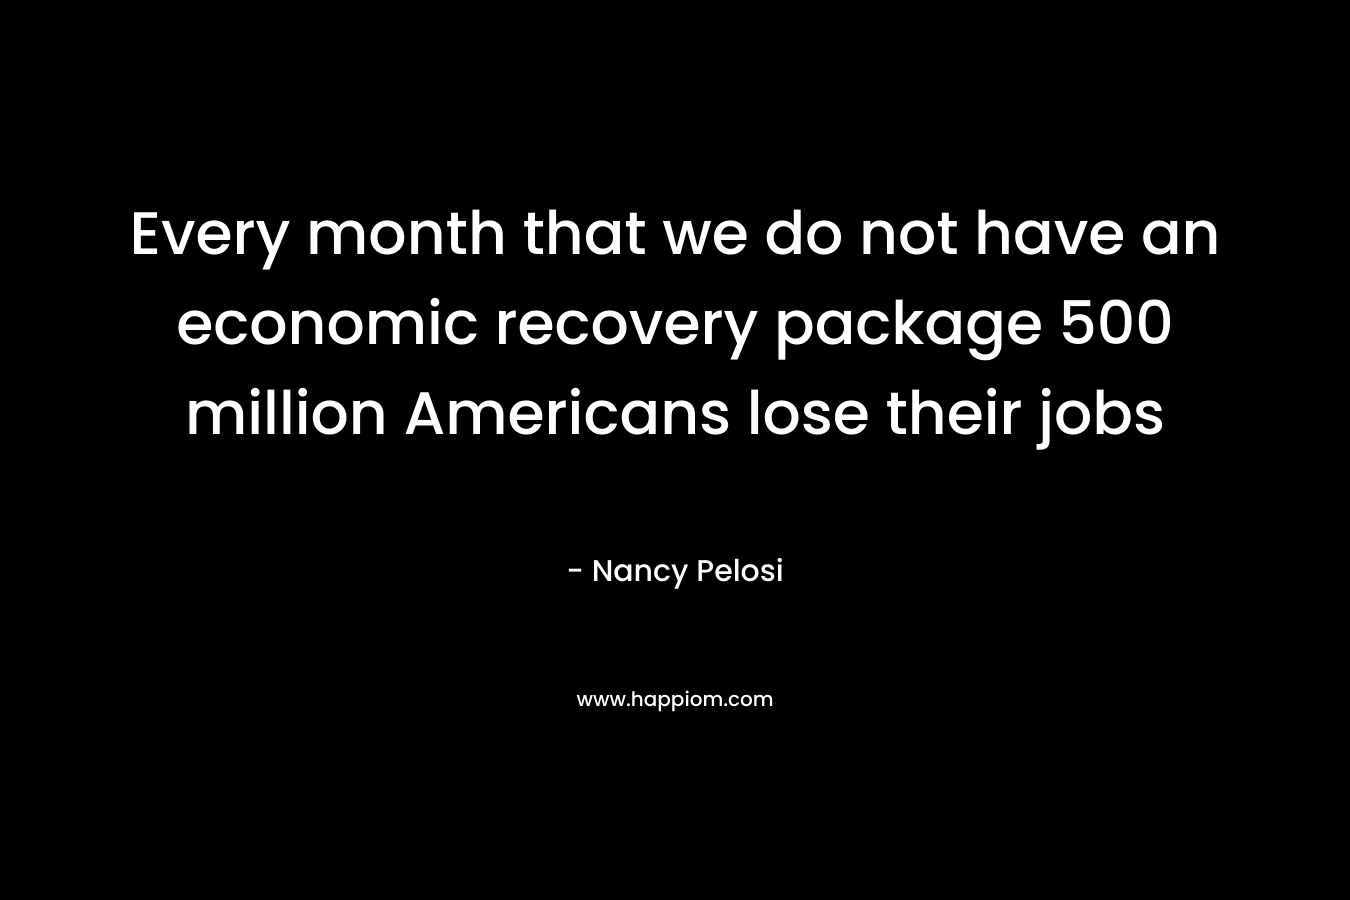 Every month that we do not have an economic recovery package 500 million Americans lose their jobs – Nancy Pelosi